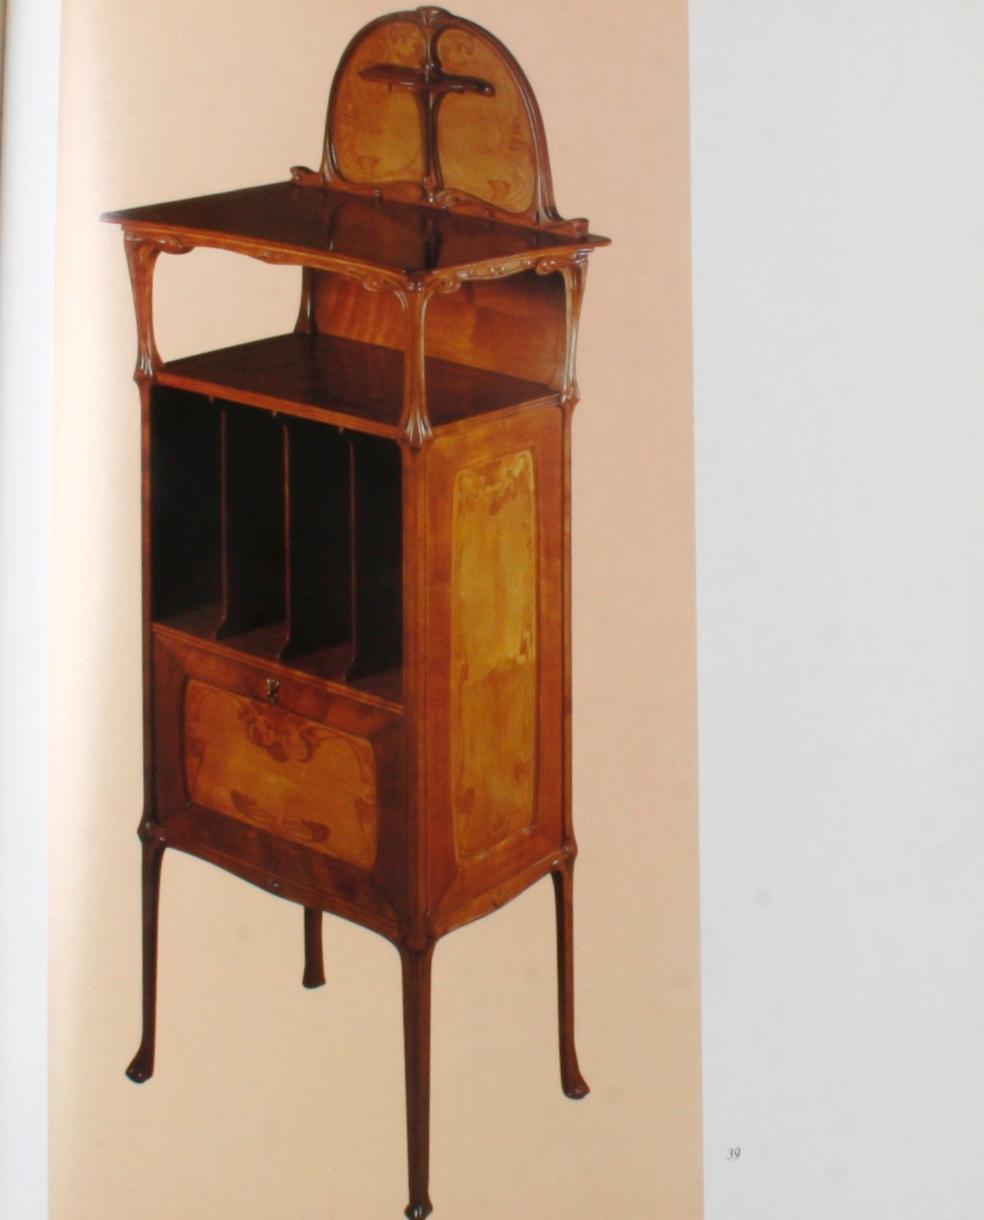 Art Nouveau Furniture by Alastair Duncan, Stated First Edition In Excellent Condition For Sale In valatie, NY